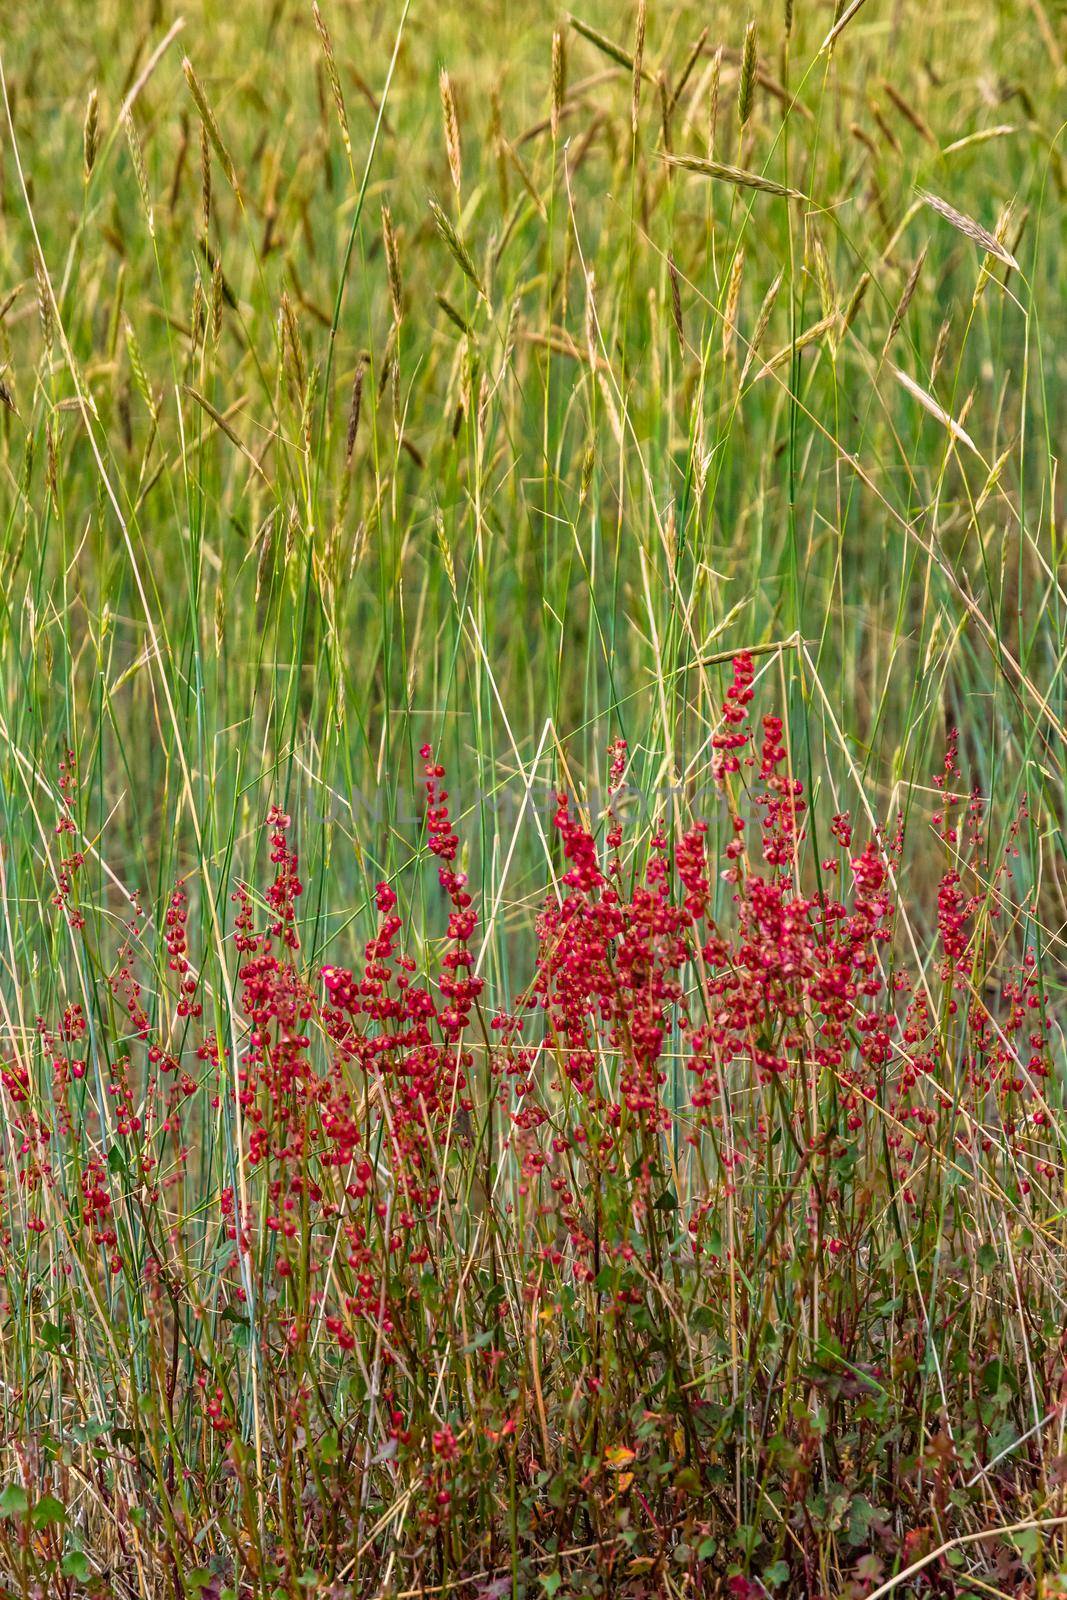 Typical small red flowers of Etna volcano landscapes in summer. Sicily, Italy